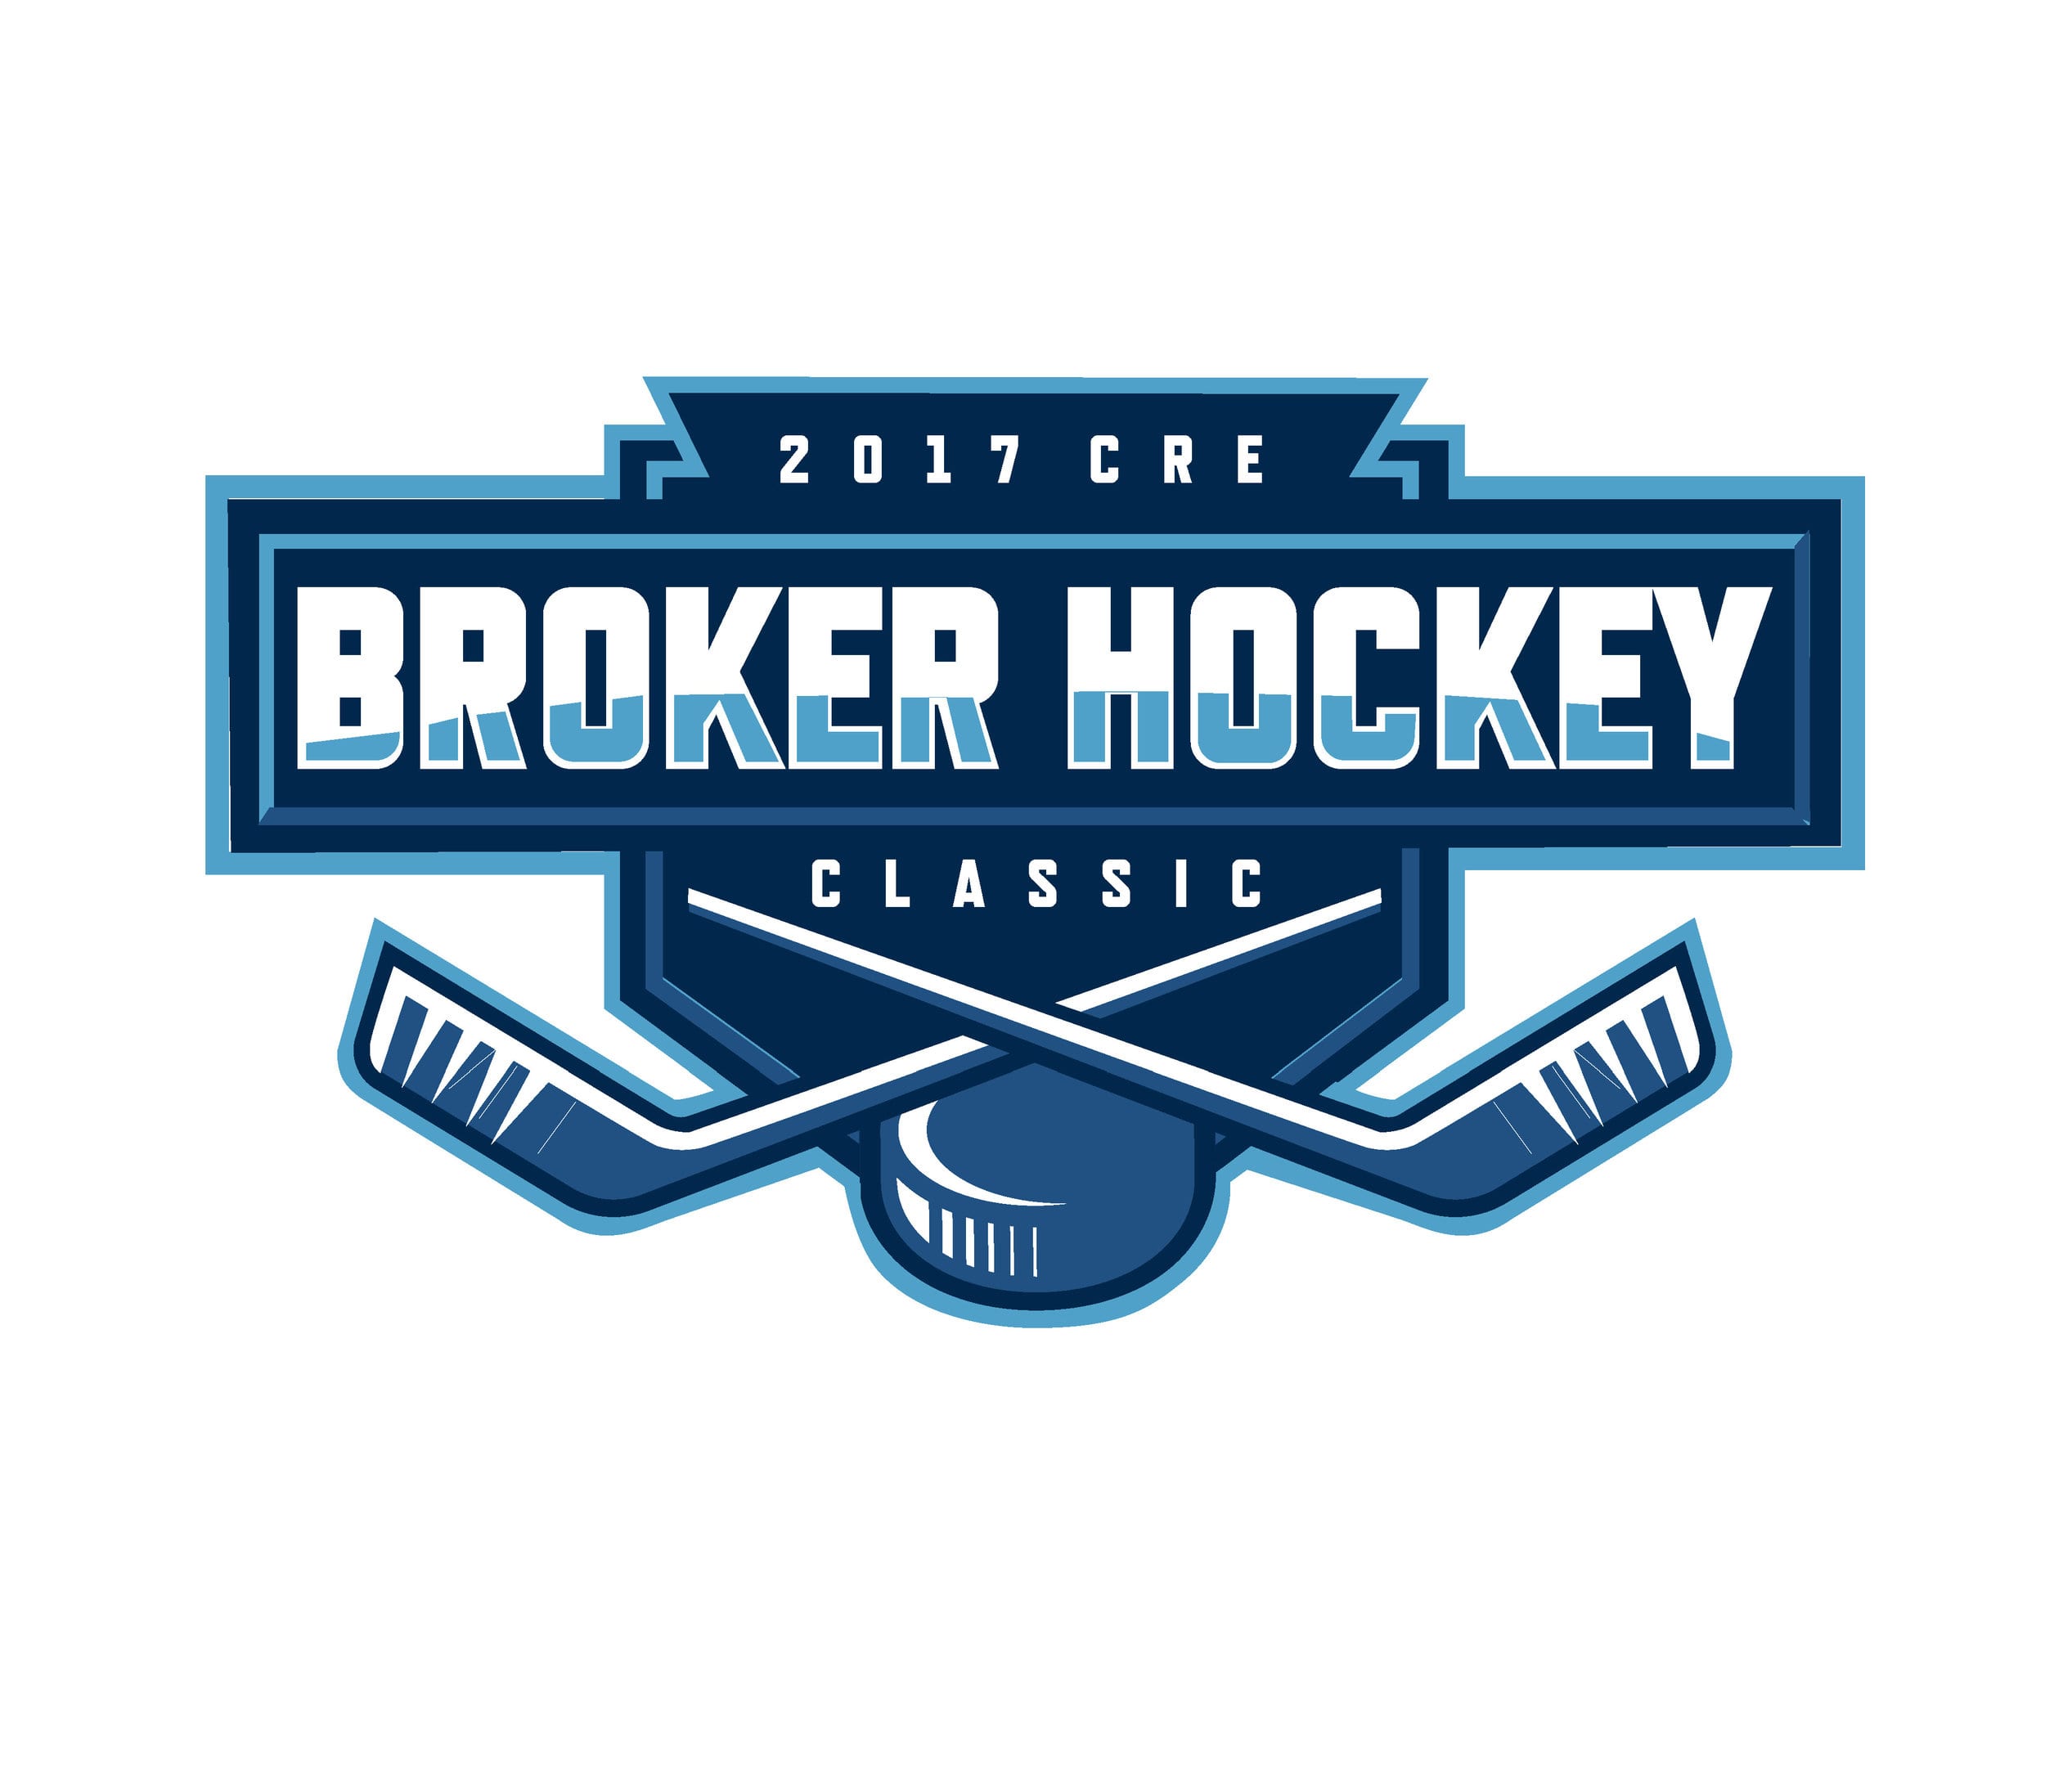 7th Annual CRE Broker Hockey Classic will take place March 30